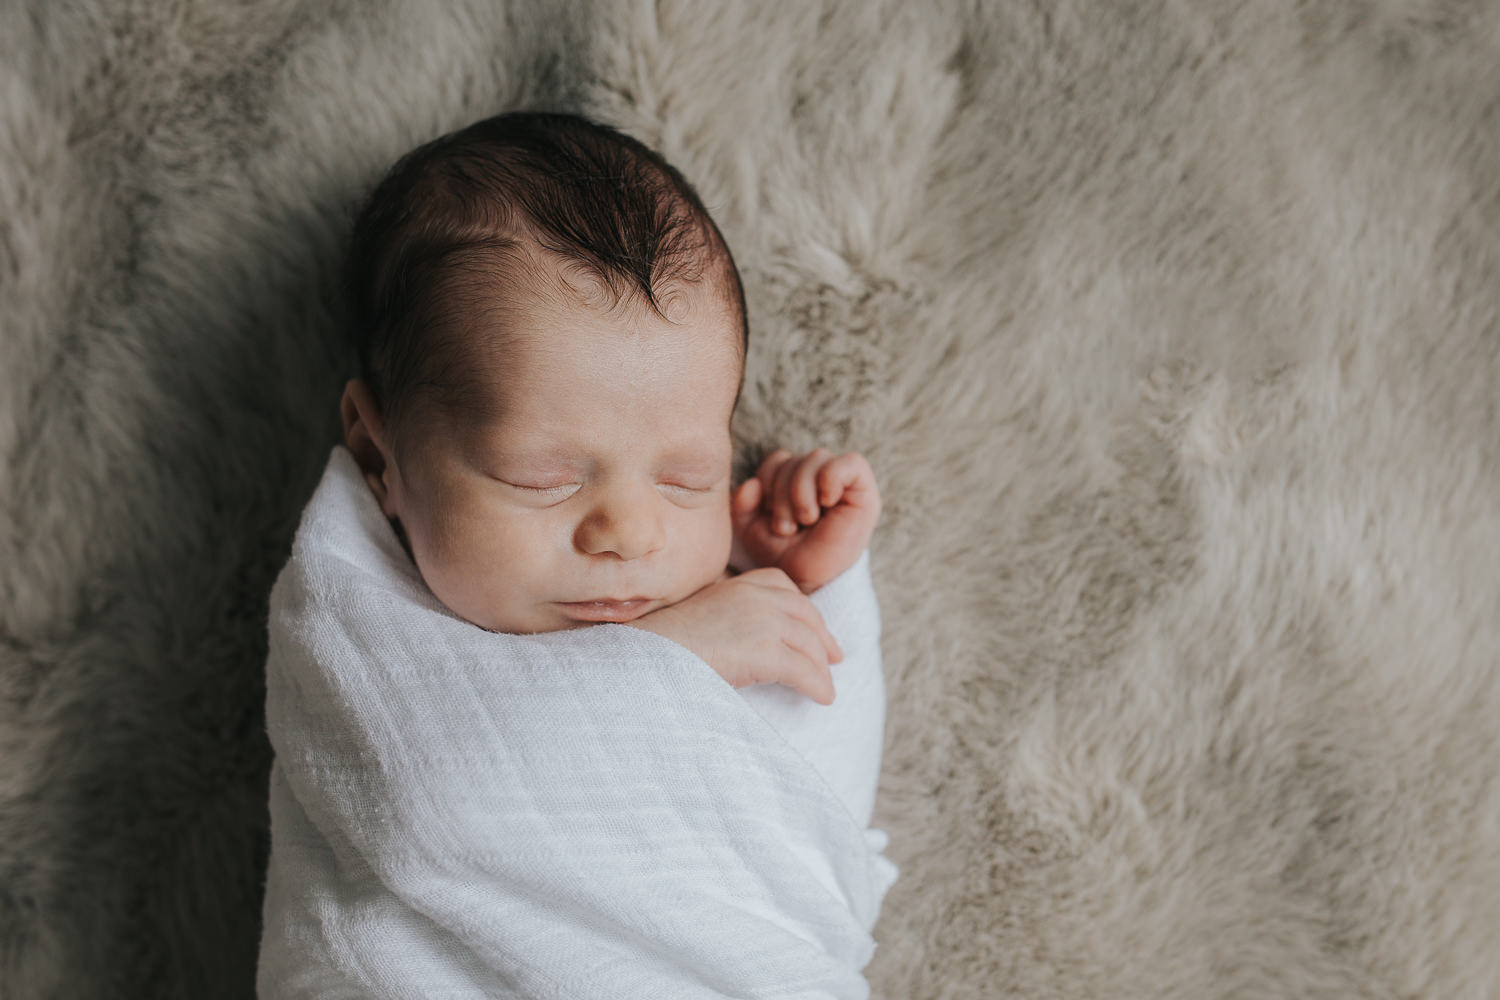 2 week old baby boy with dark hair lying on fur blanket in white swaddle, sleeping with hands next to face - Stouffville Lifestyle Photography